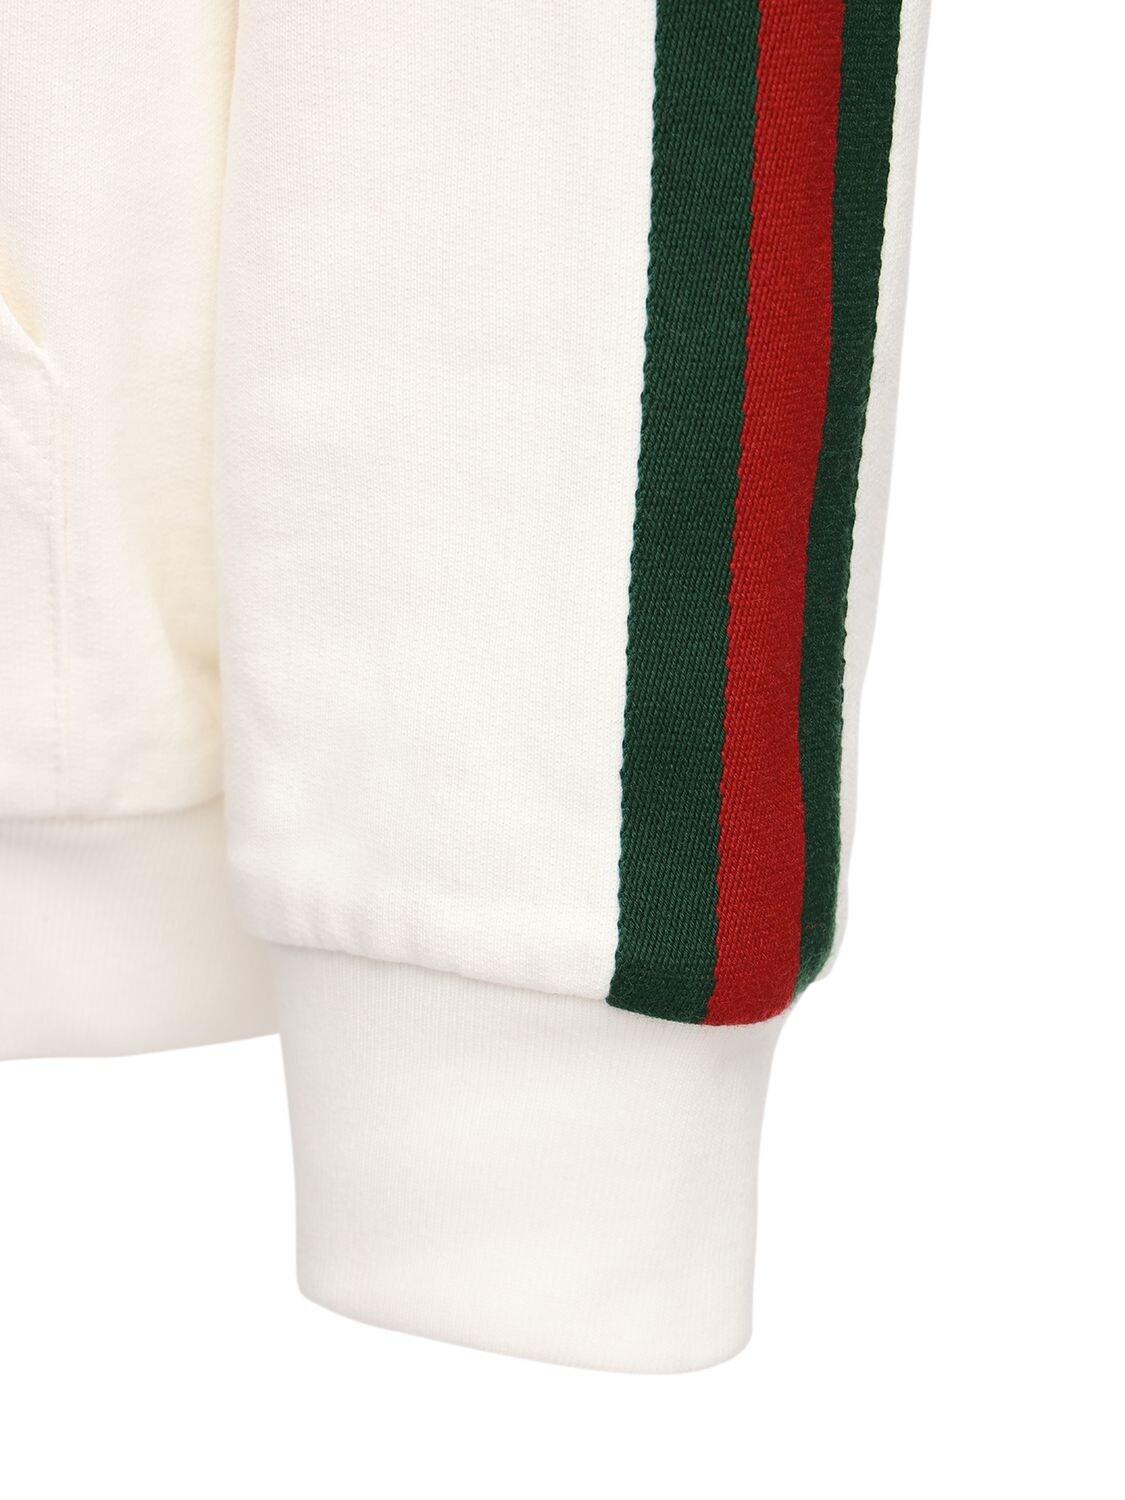 Gucci White Cotton Track Jacket in Natural for Men | Lyst